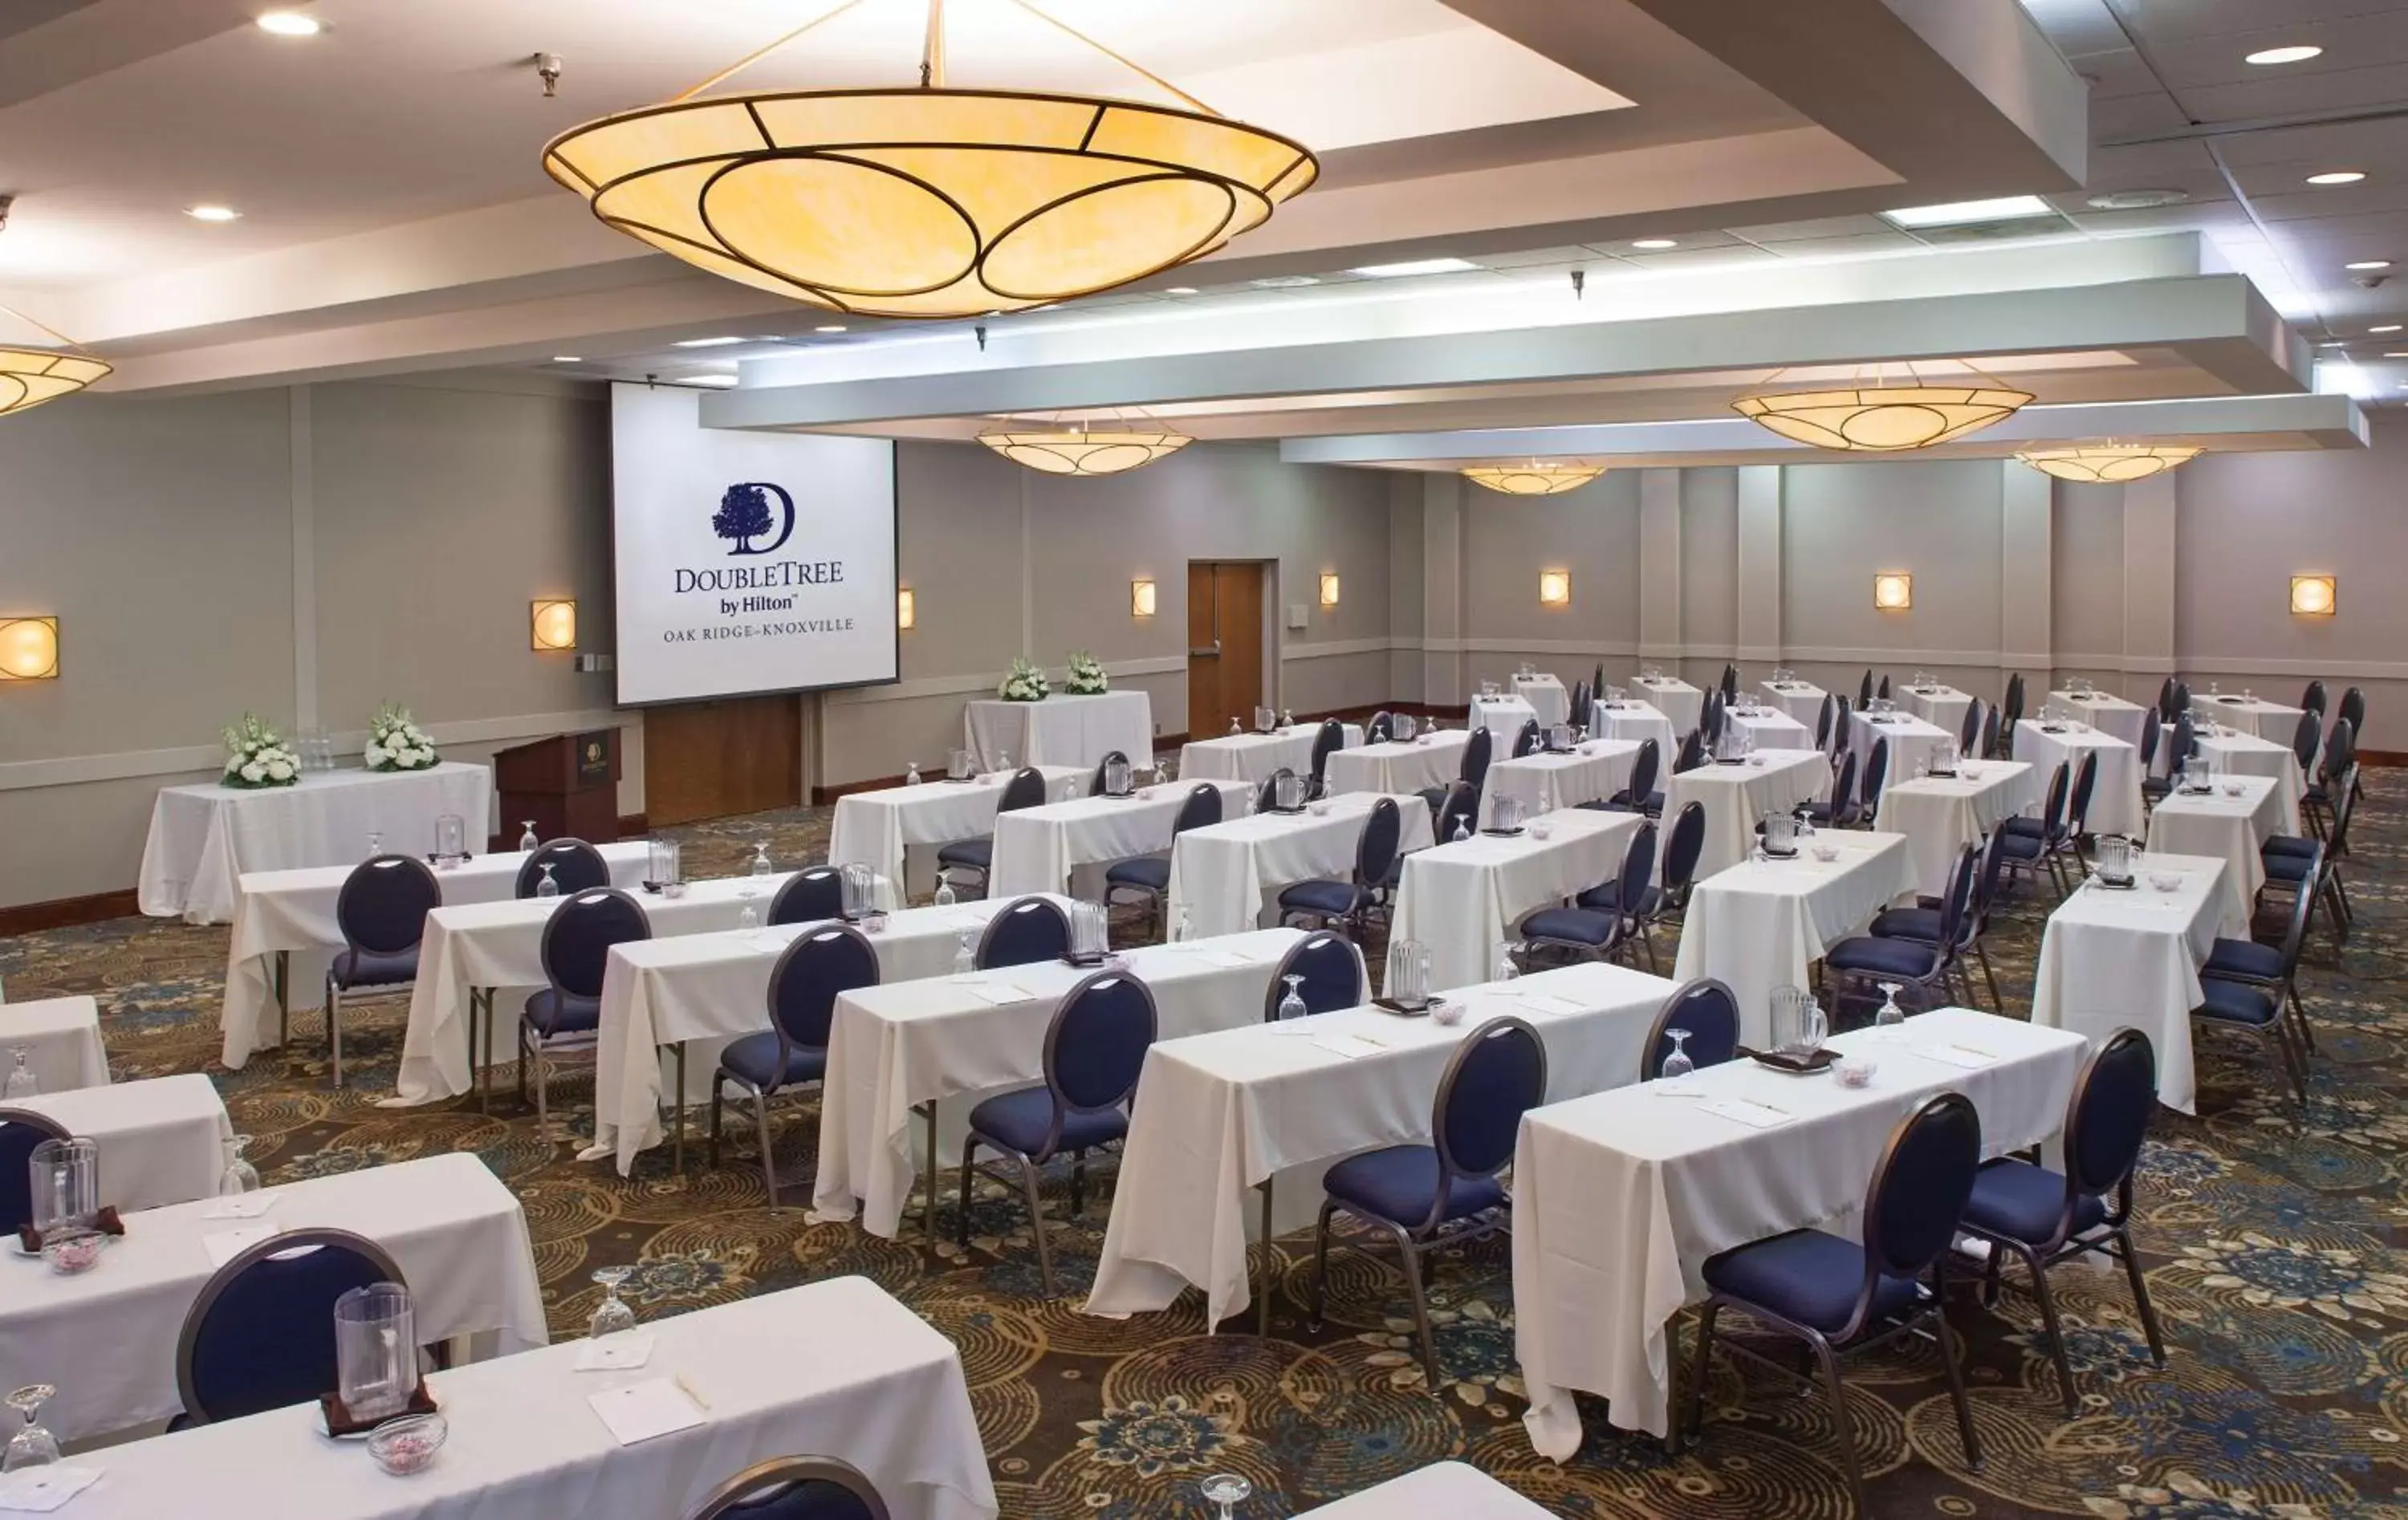 Meeting/conference room in DoubleTree by Hilton Hotel Oak Ridge - Knoxville